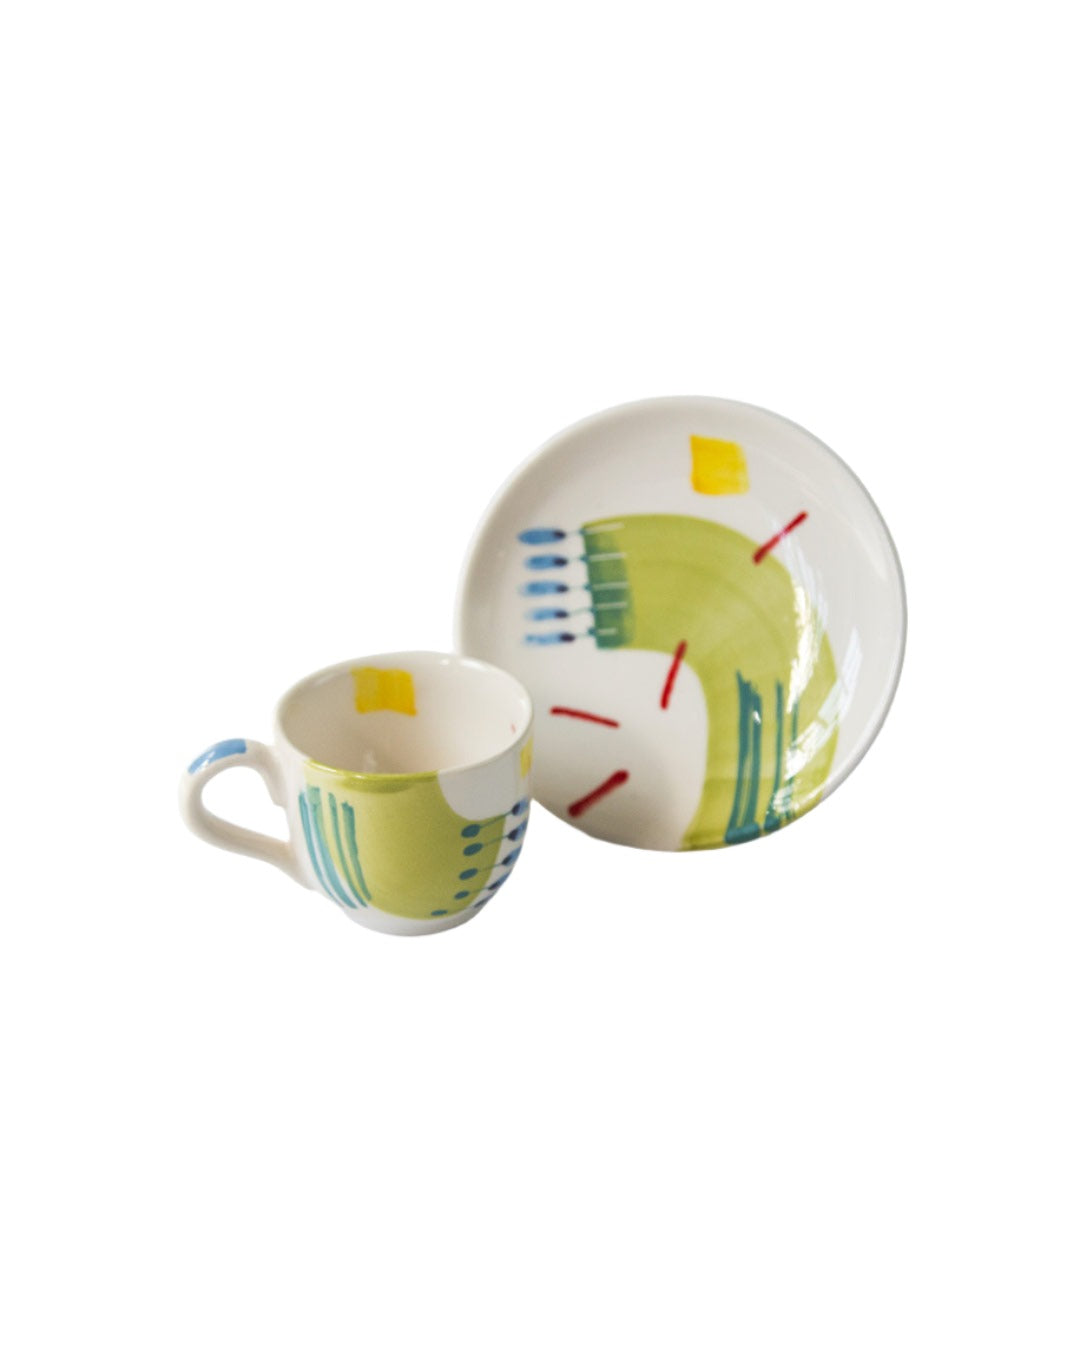 Hand-painted coffe cup - Martina Zena